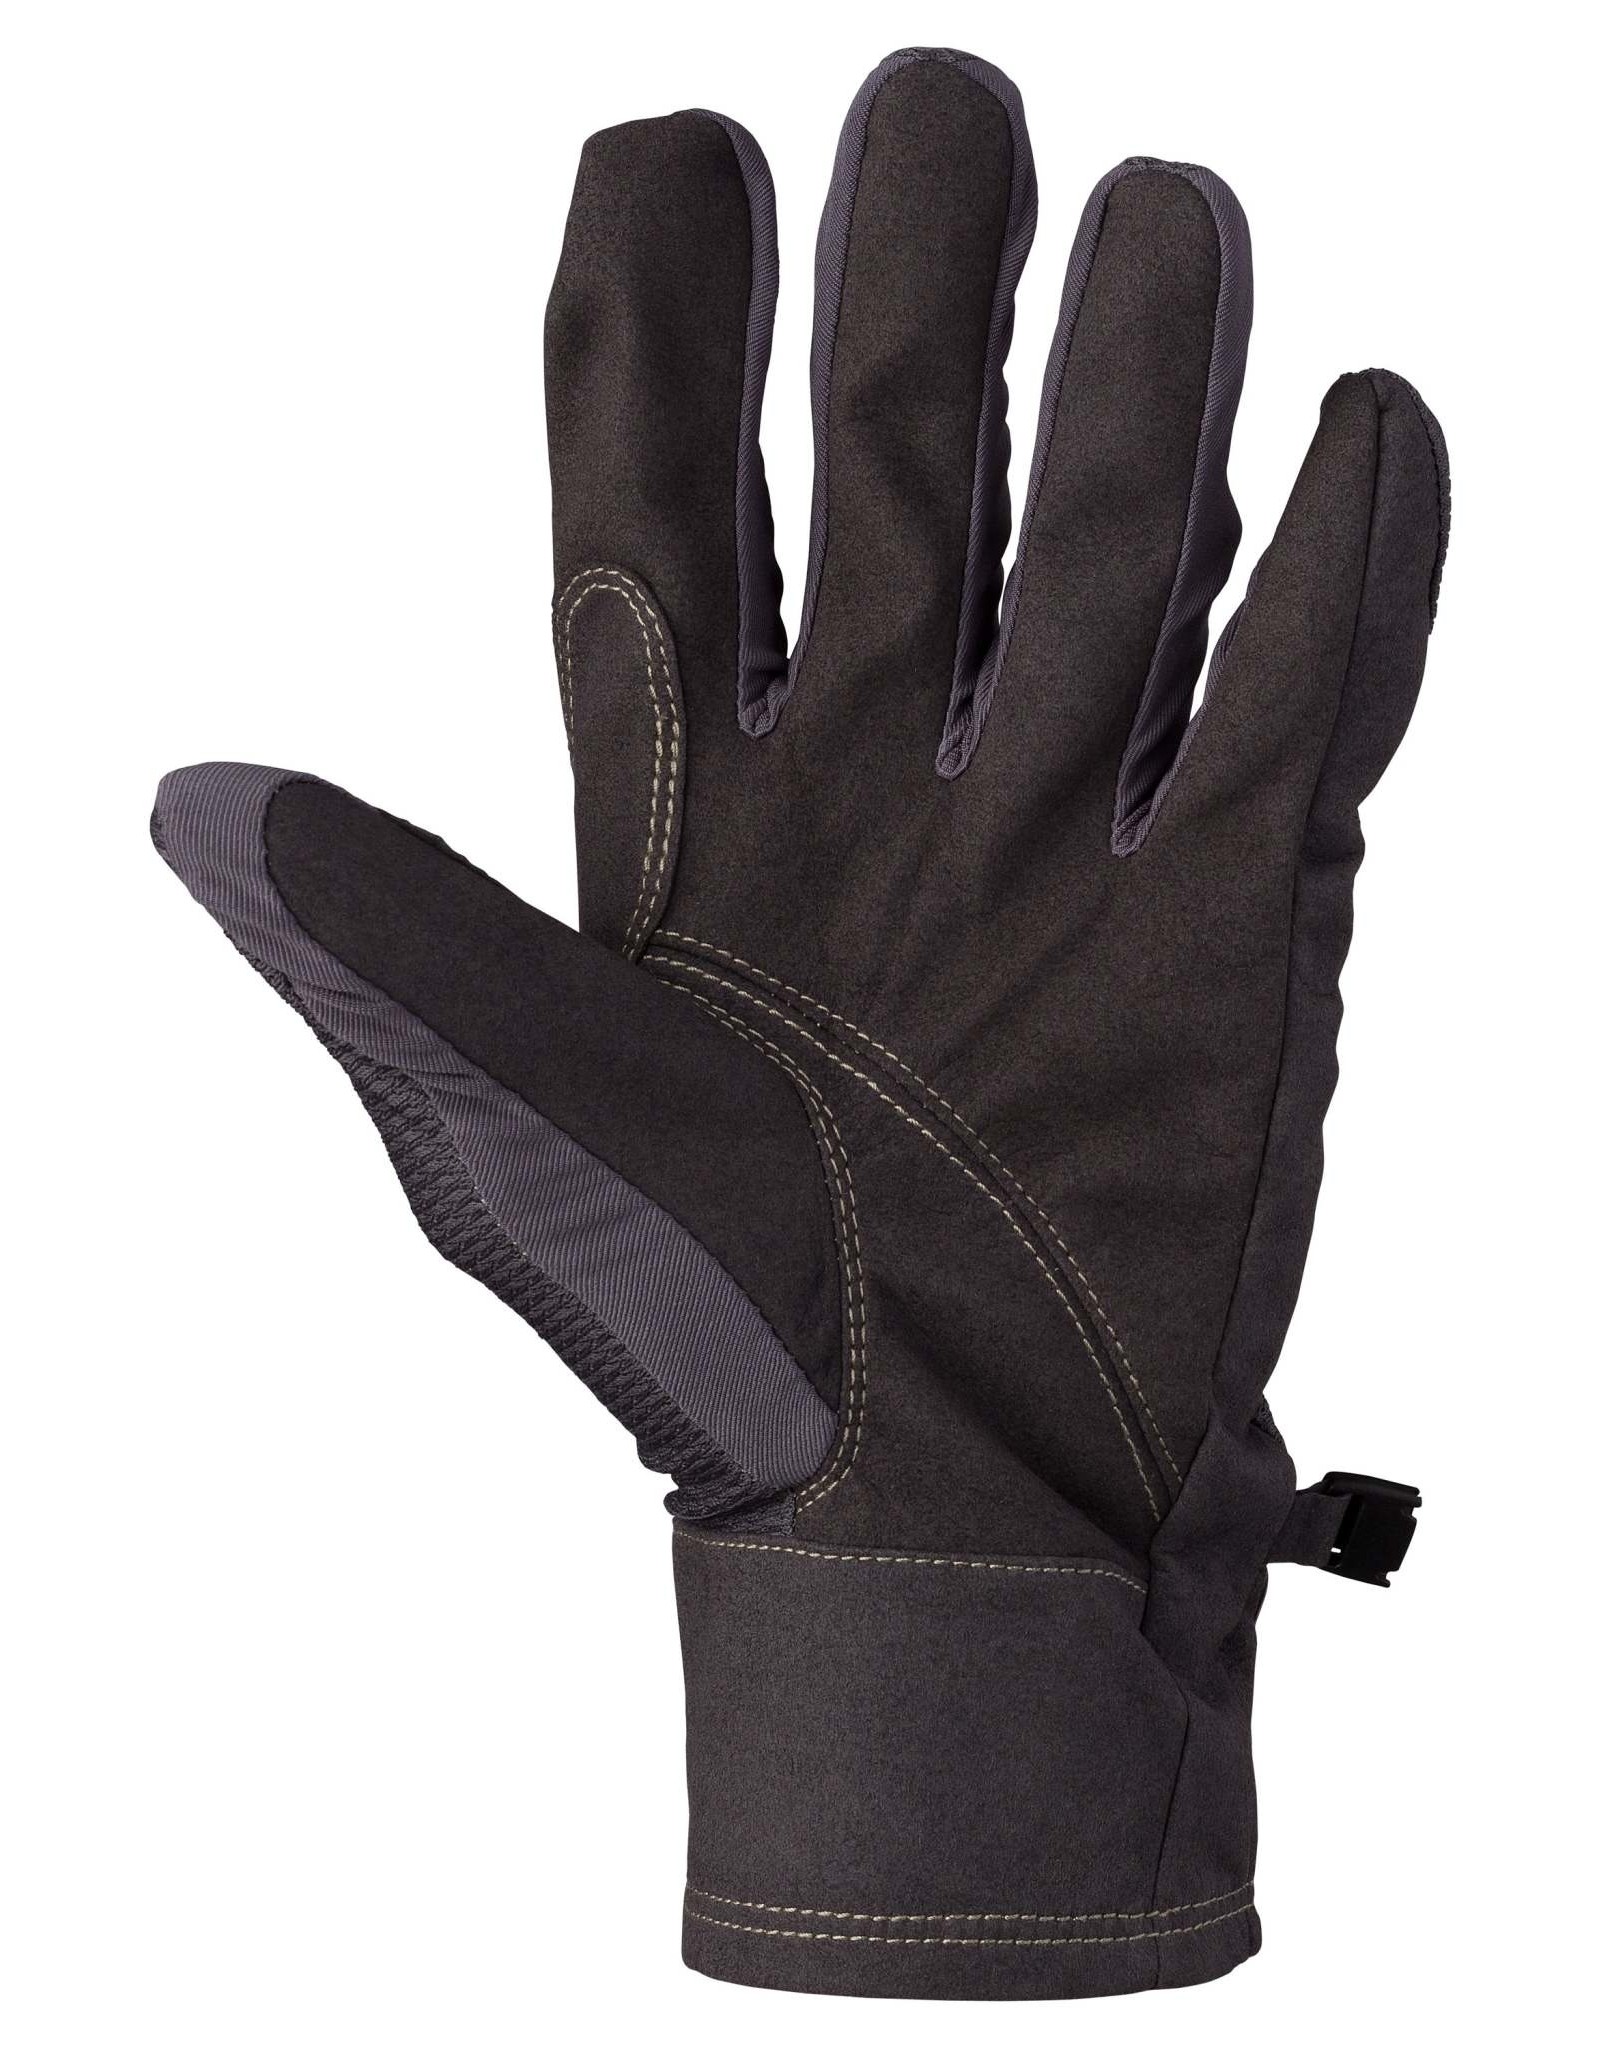 Browning Trapper Creek Shooting Gloves - Charcoal - LG